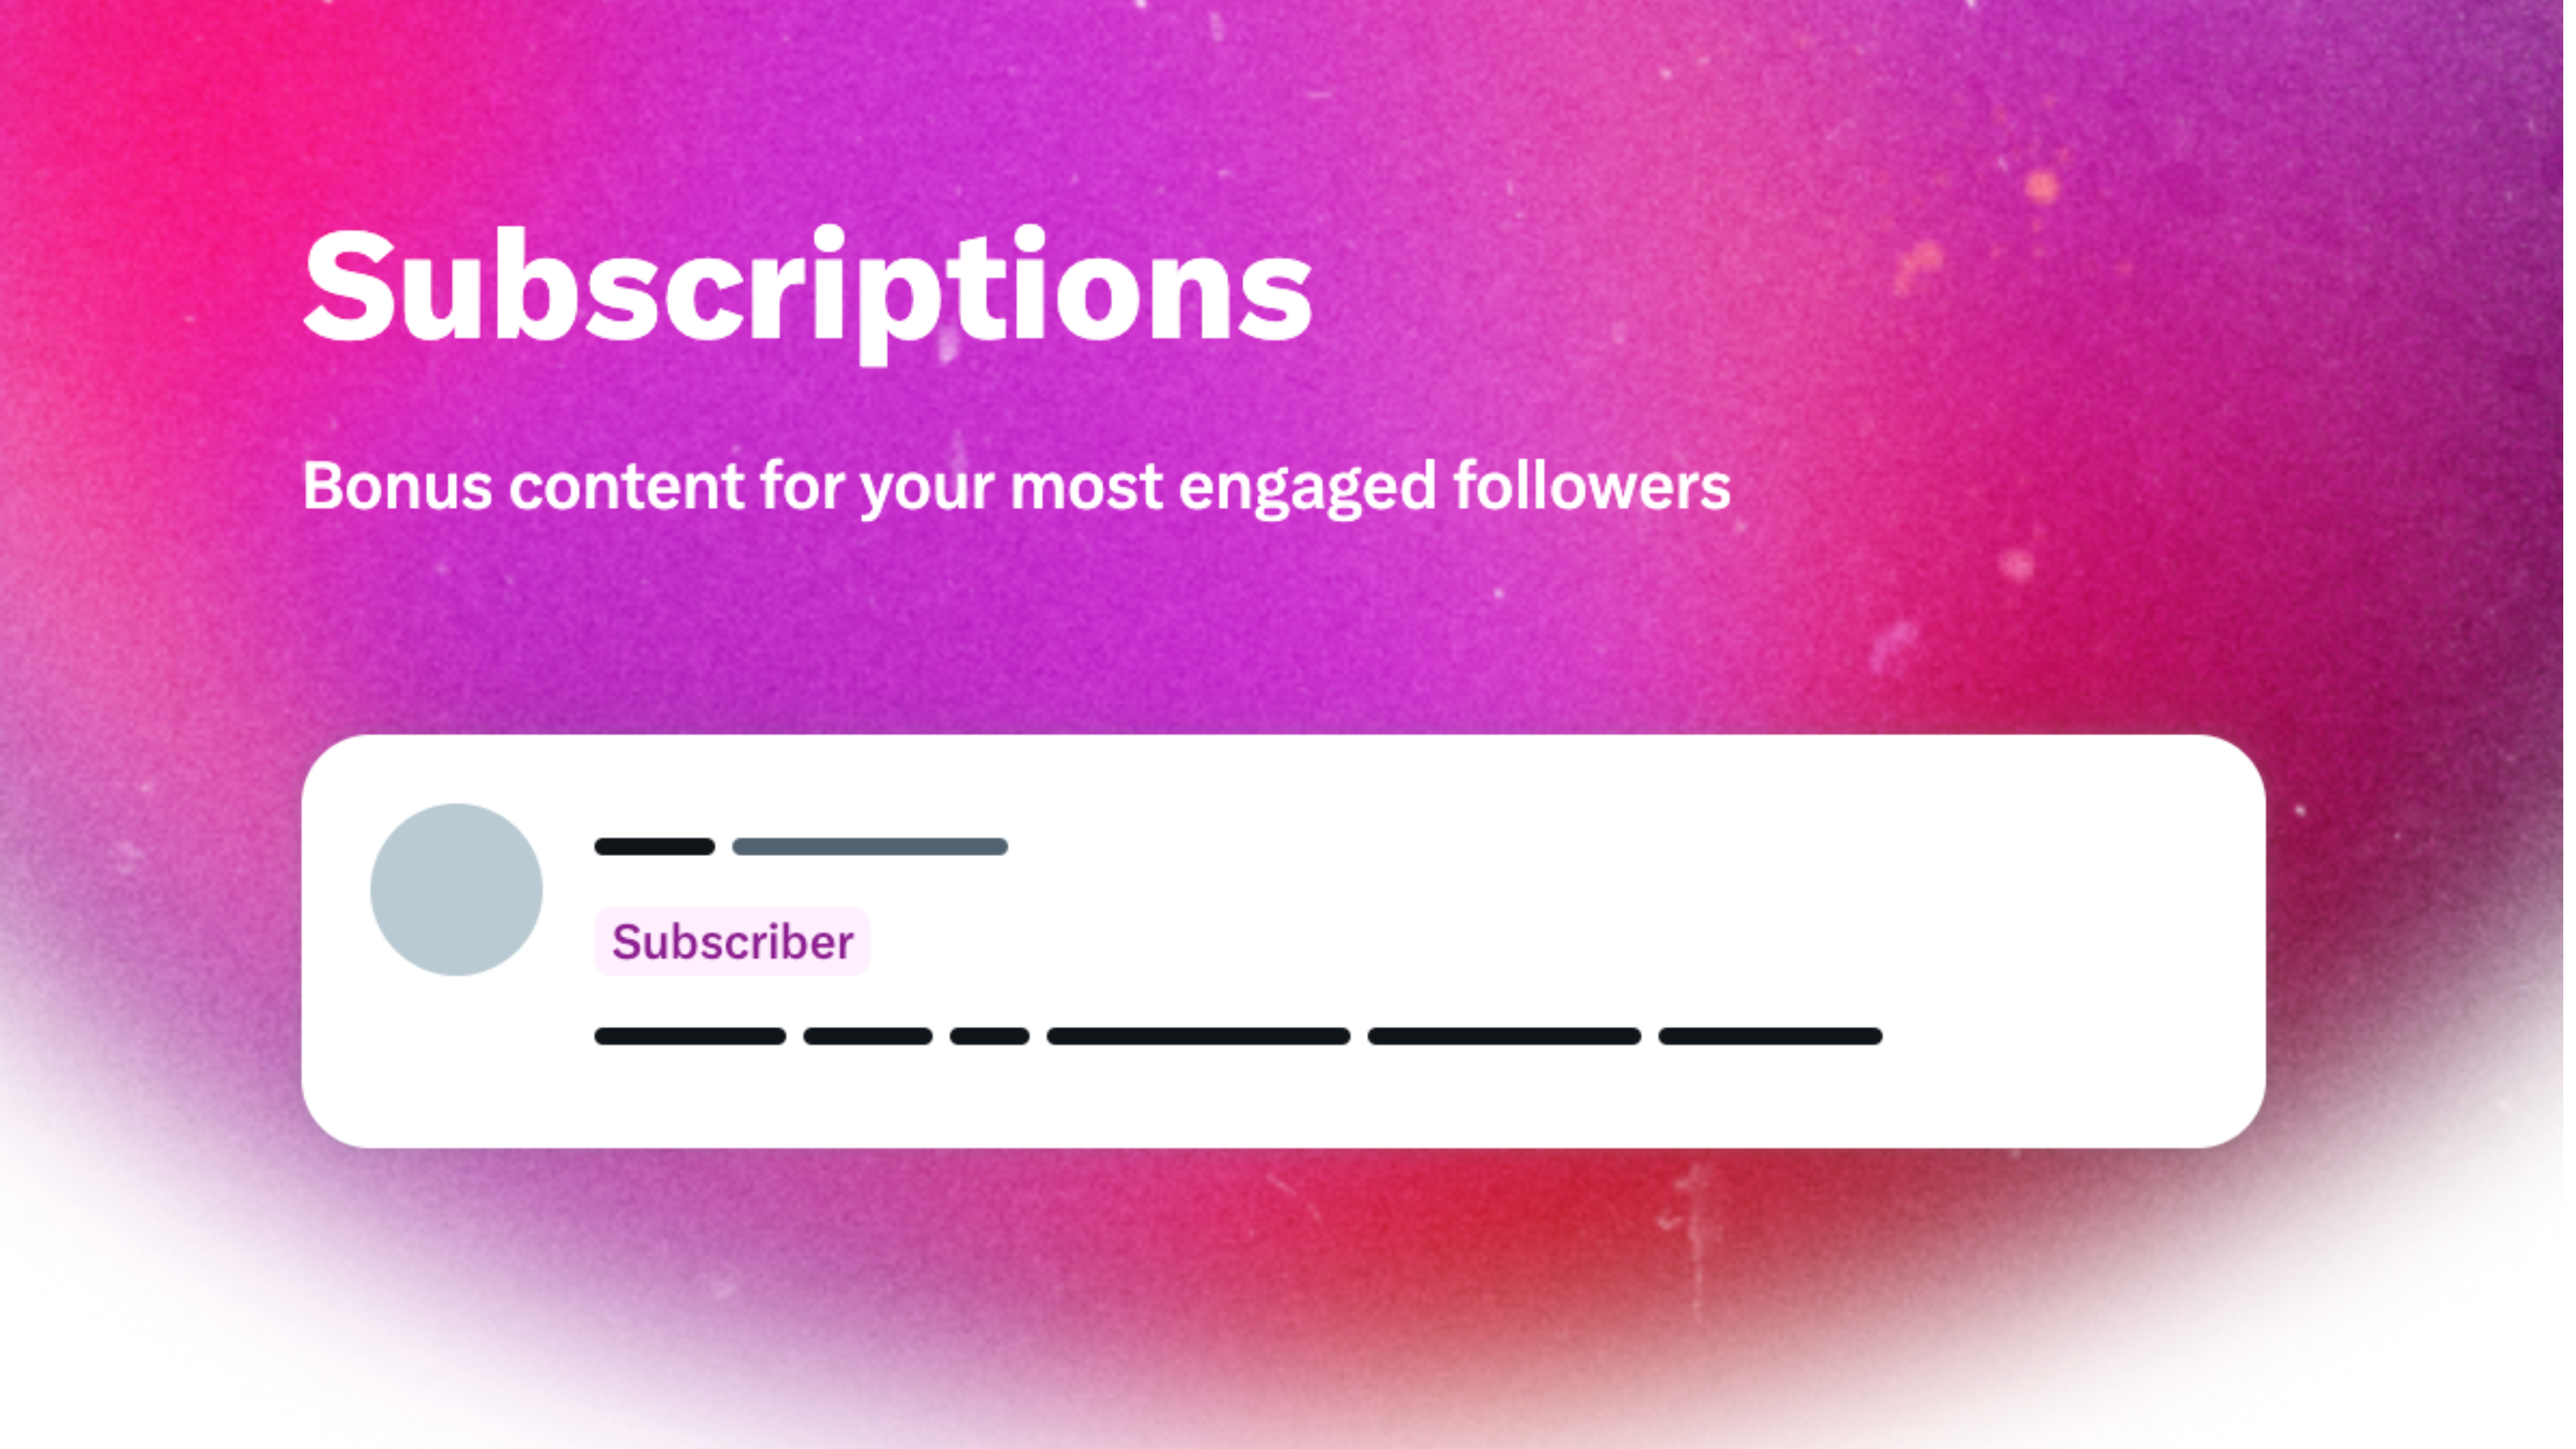 Twitter Subscriptions in pink showing eligibility for the service